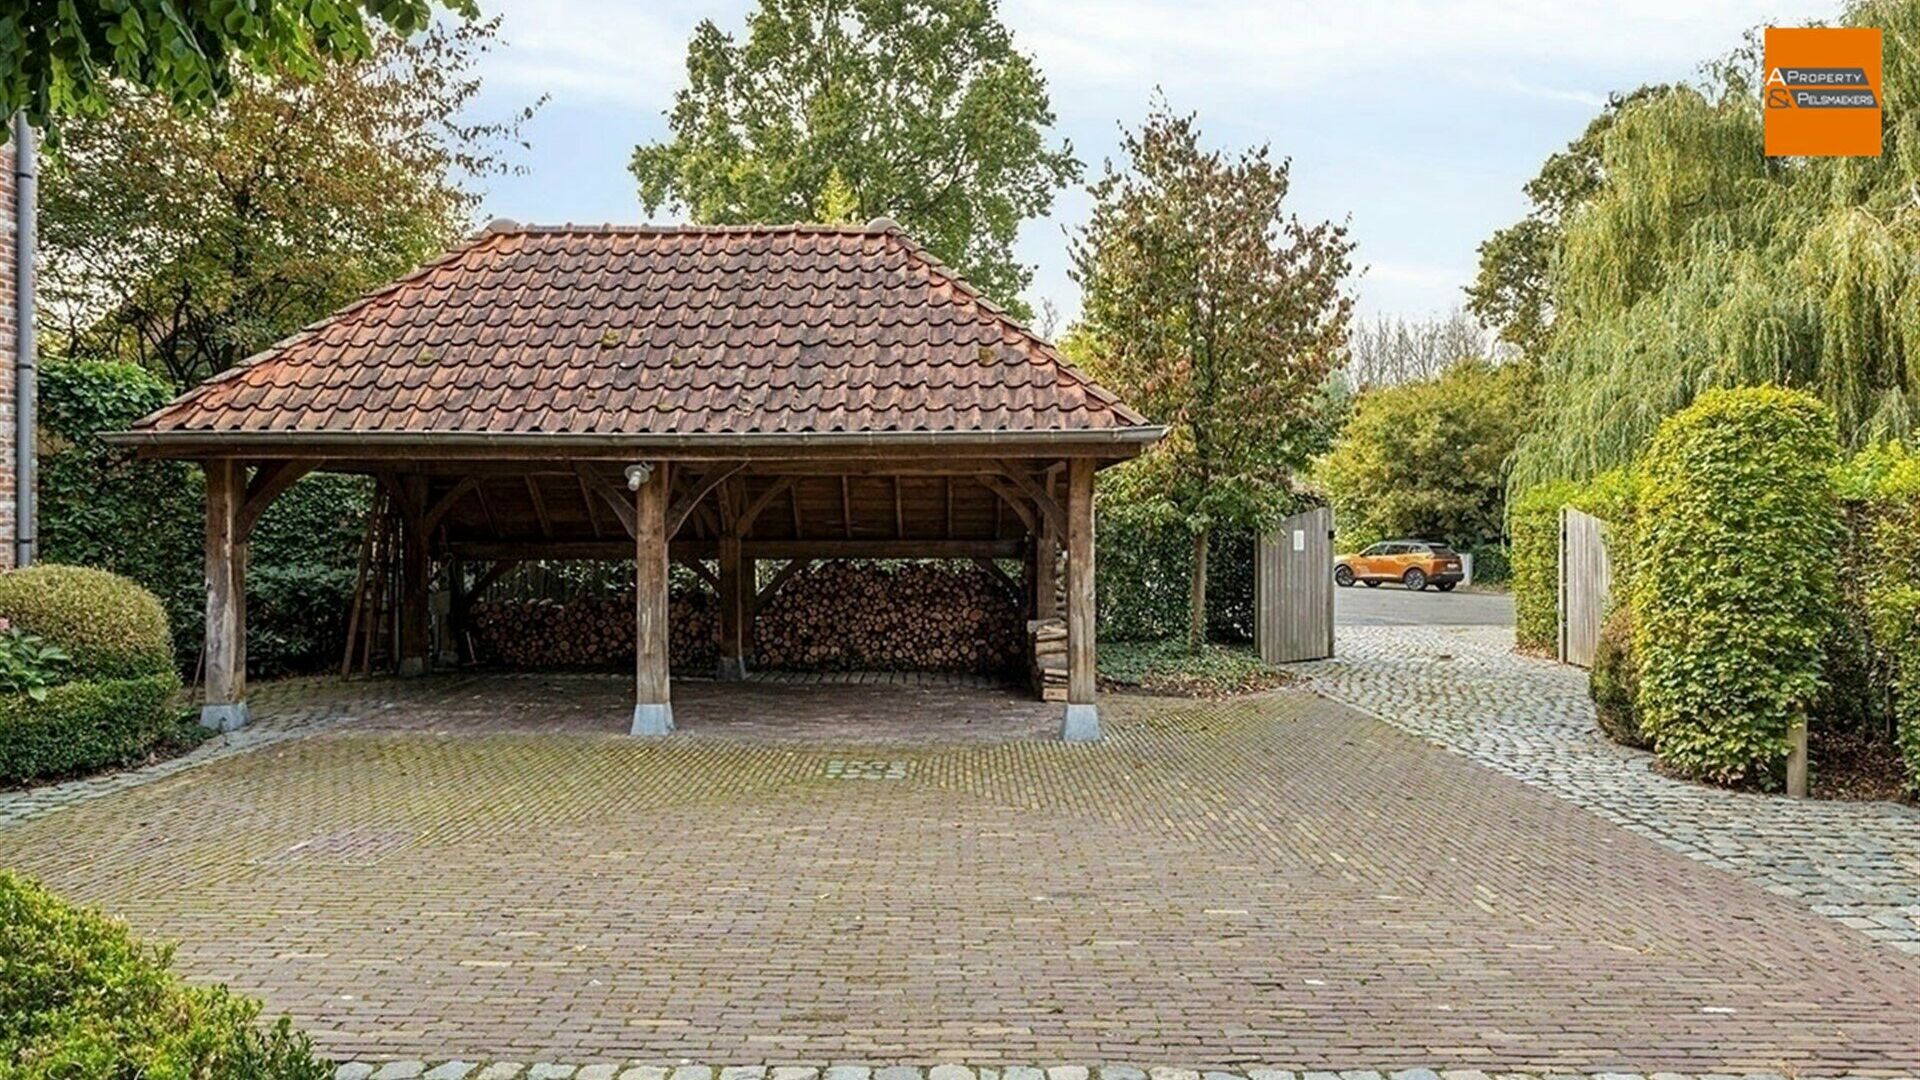 Villa for sale in ERPS-KWERPS